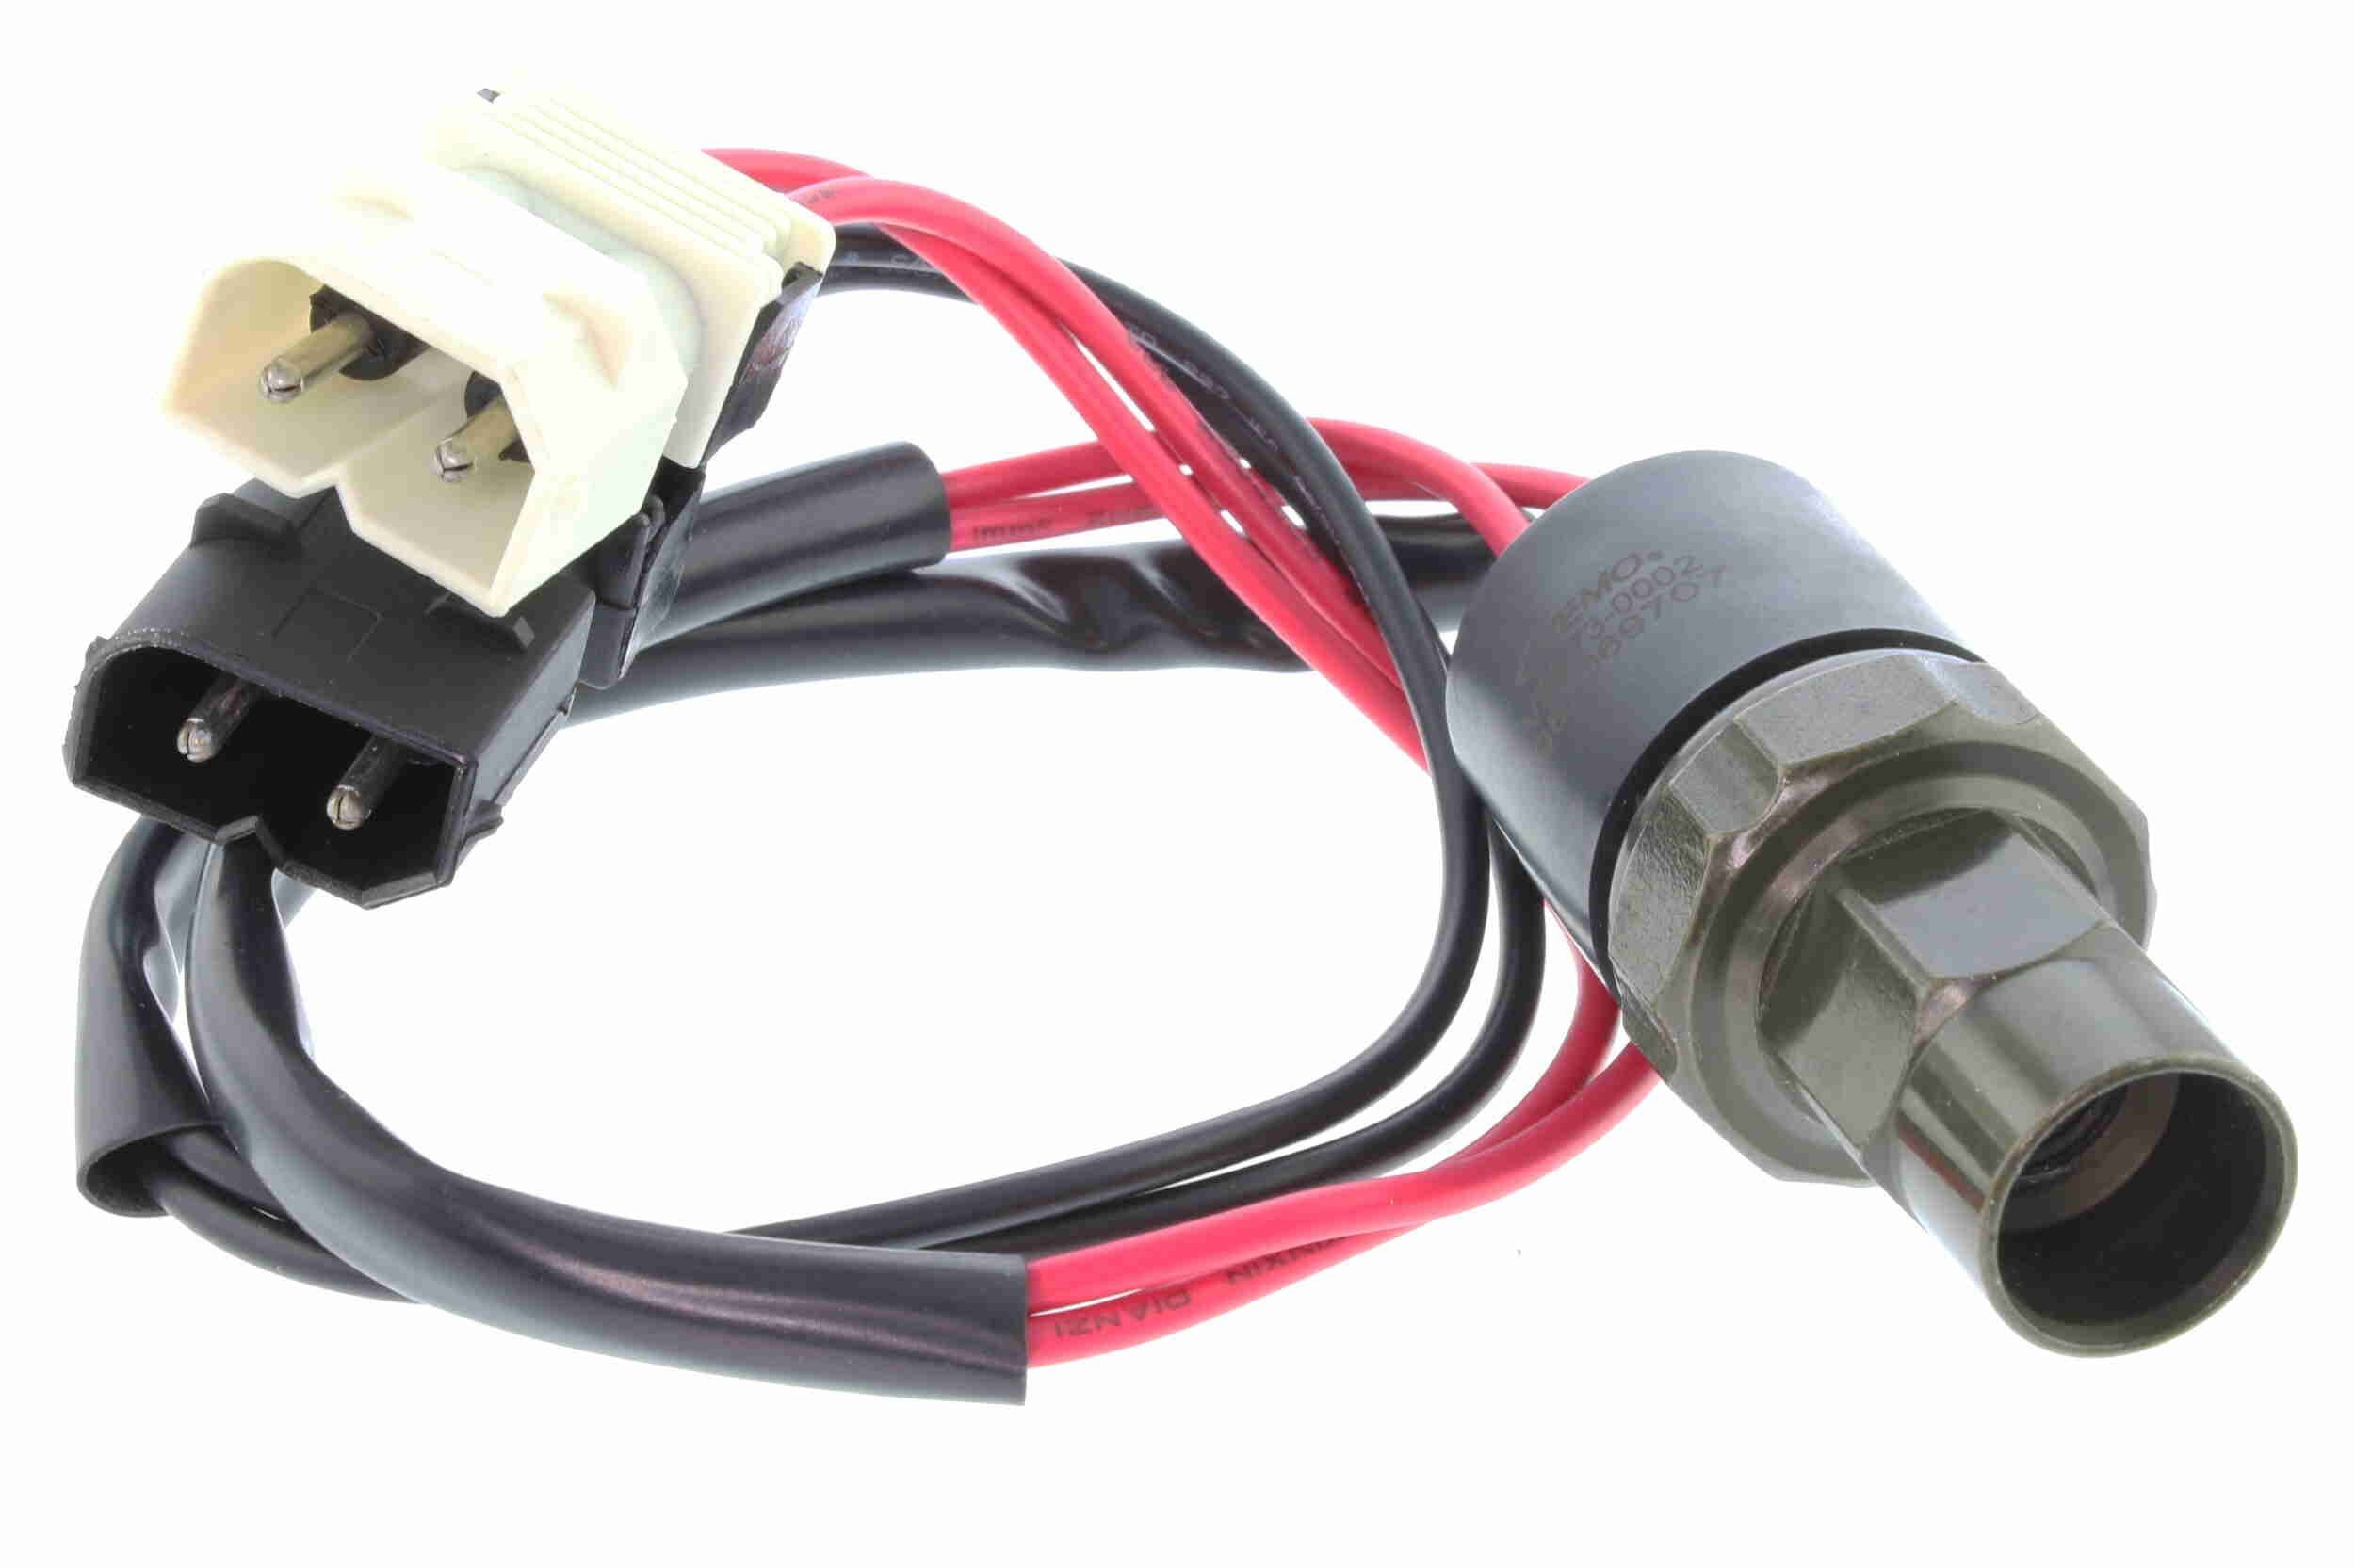 VEMO Air con pressure switch V20-73-0002 for BMW 8 Series, 3 Series, Z3